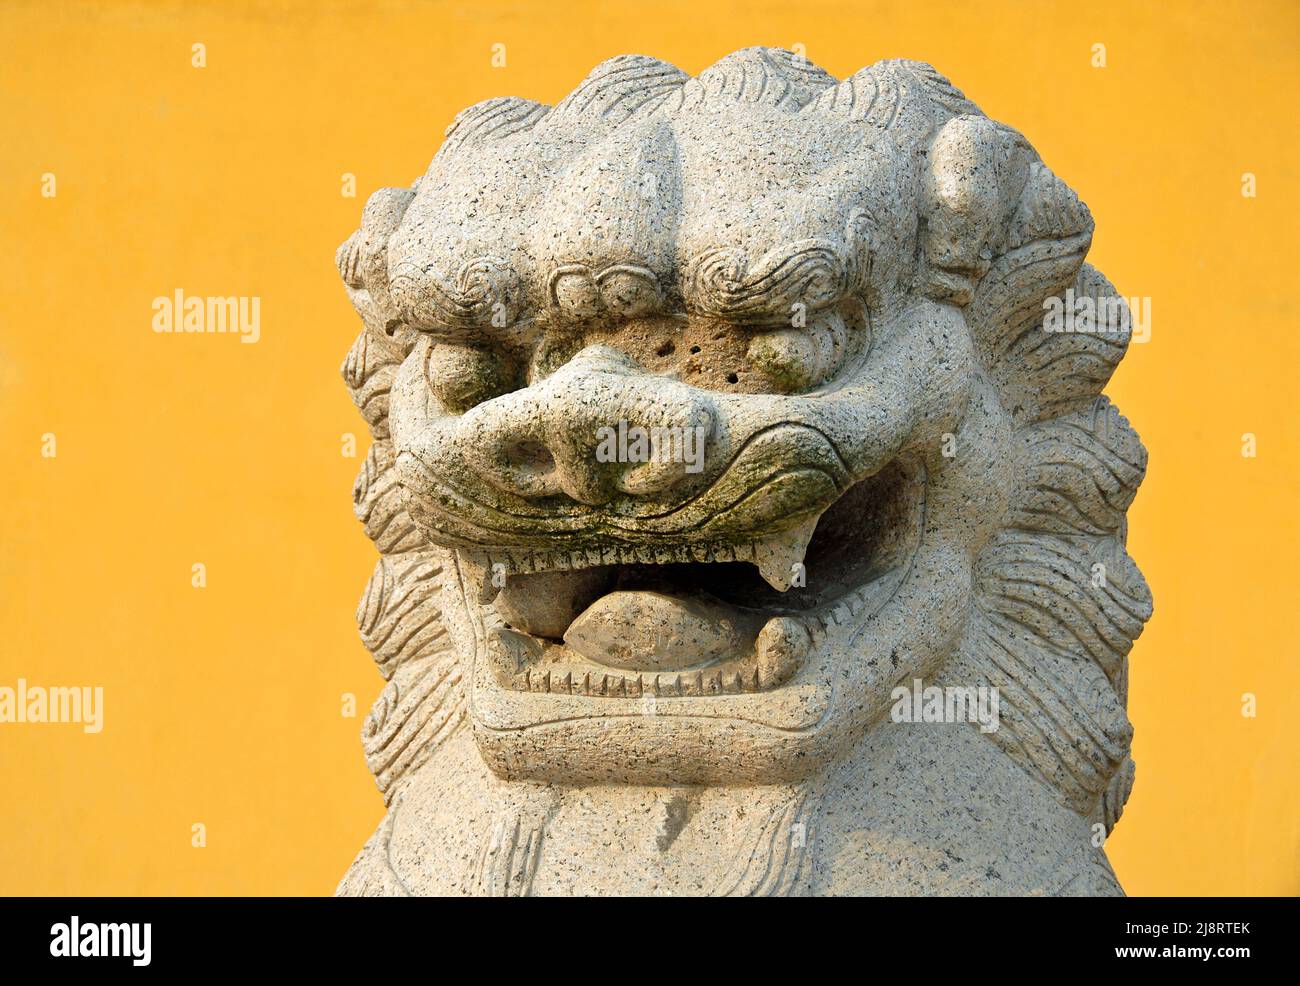 Zhenjiang, Jiangsu Province, China: Detail of a traditional Chinese lion statue against a yellow background at Dinghui Temple in Zhenjiang. Stock Photo